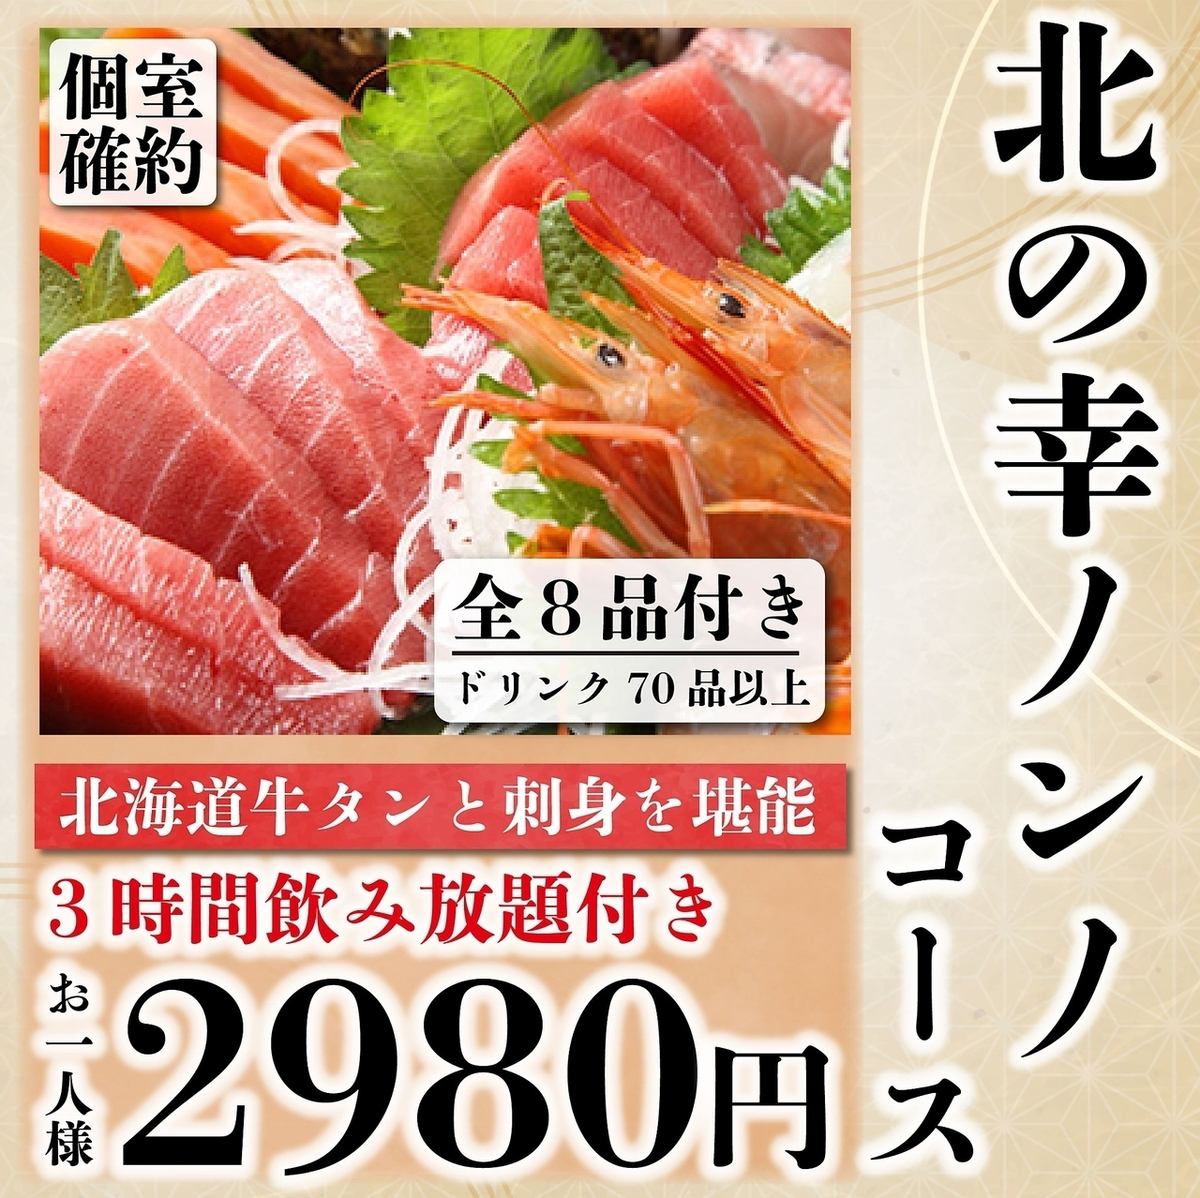 All 8 dishes "Nonno course" with 3 hours all-you-can-drink included 4480 yen ⇒ 2980 yen ♪